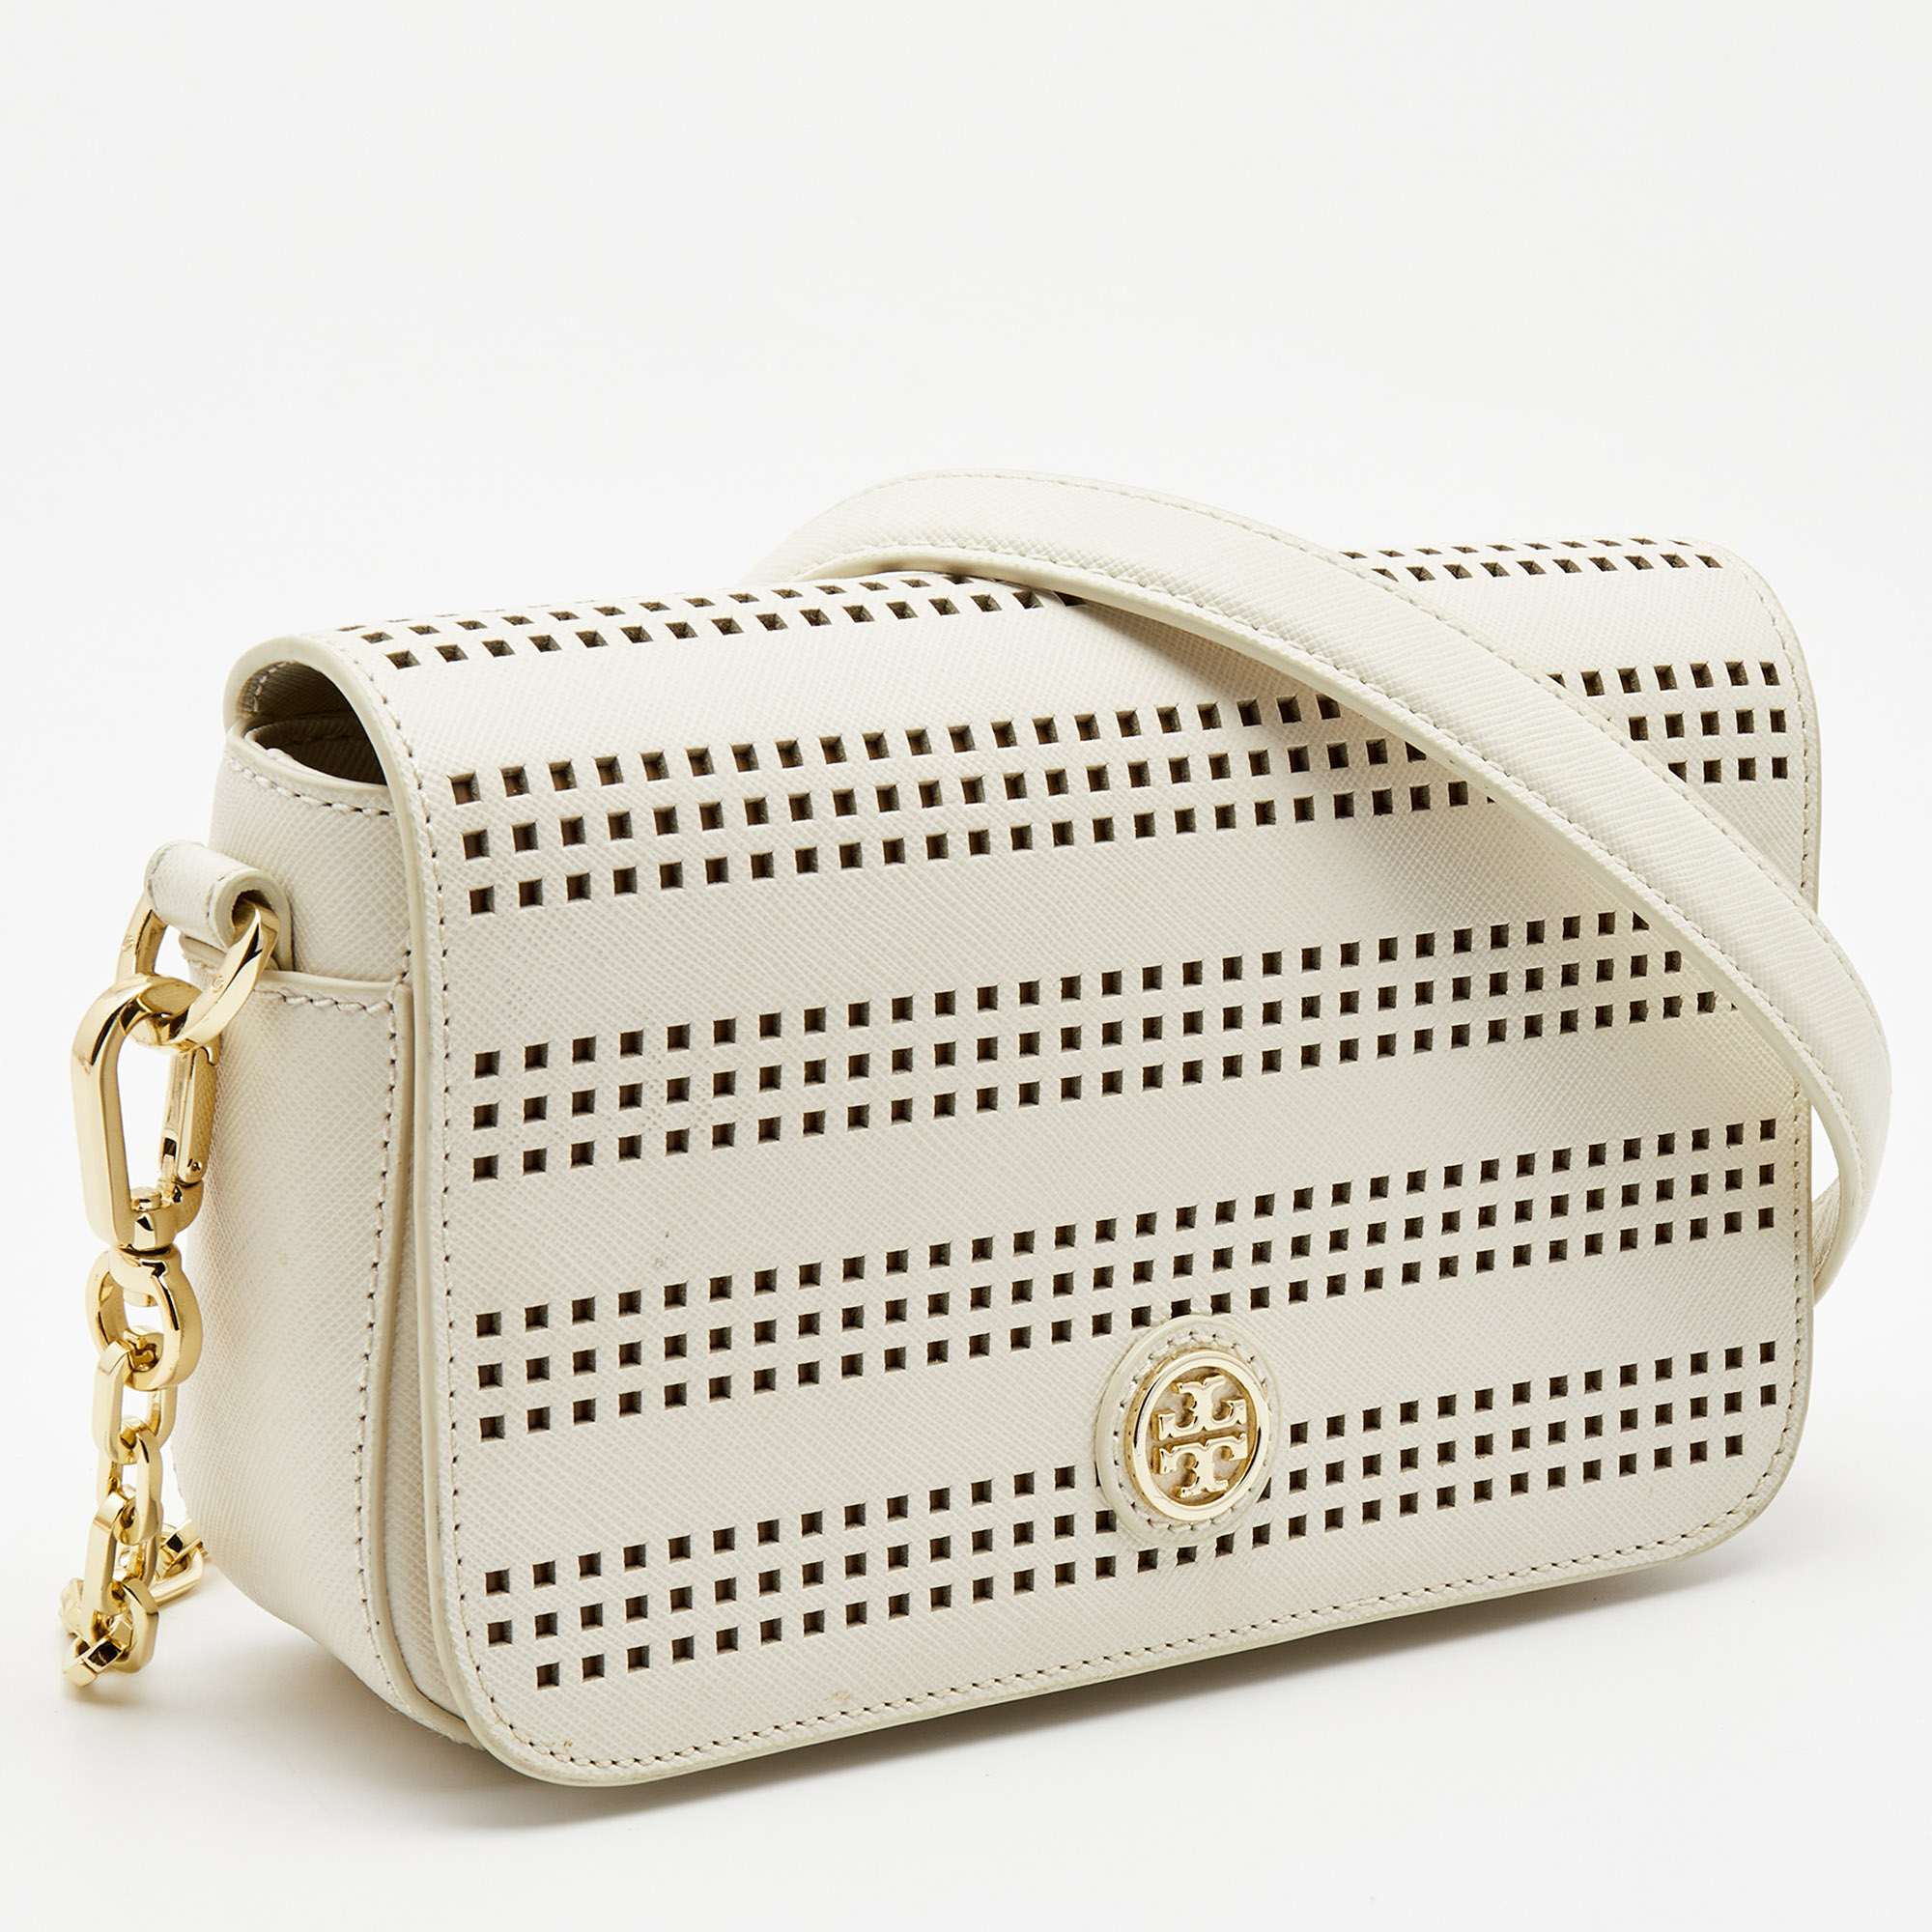 Tory Burch Off White Perforated Leather Robinson Flap Crossbody Bag